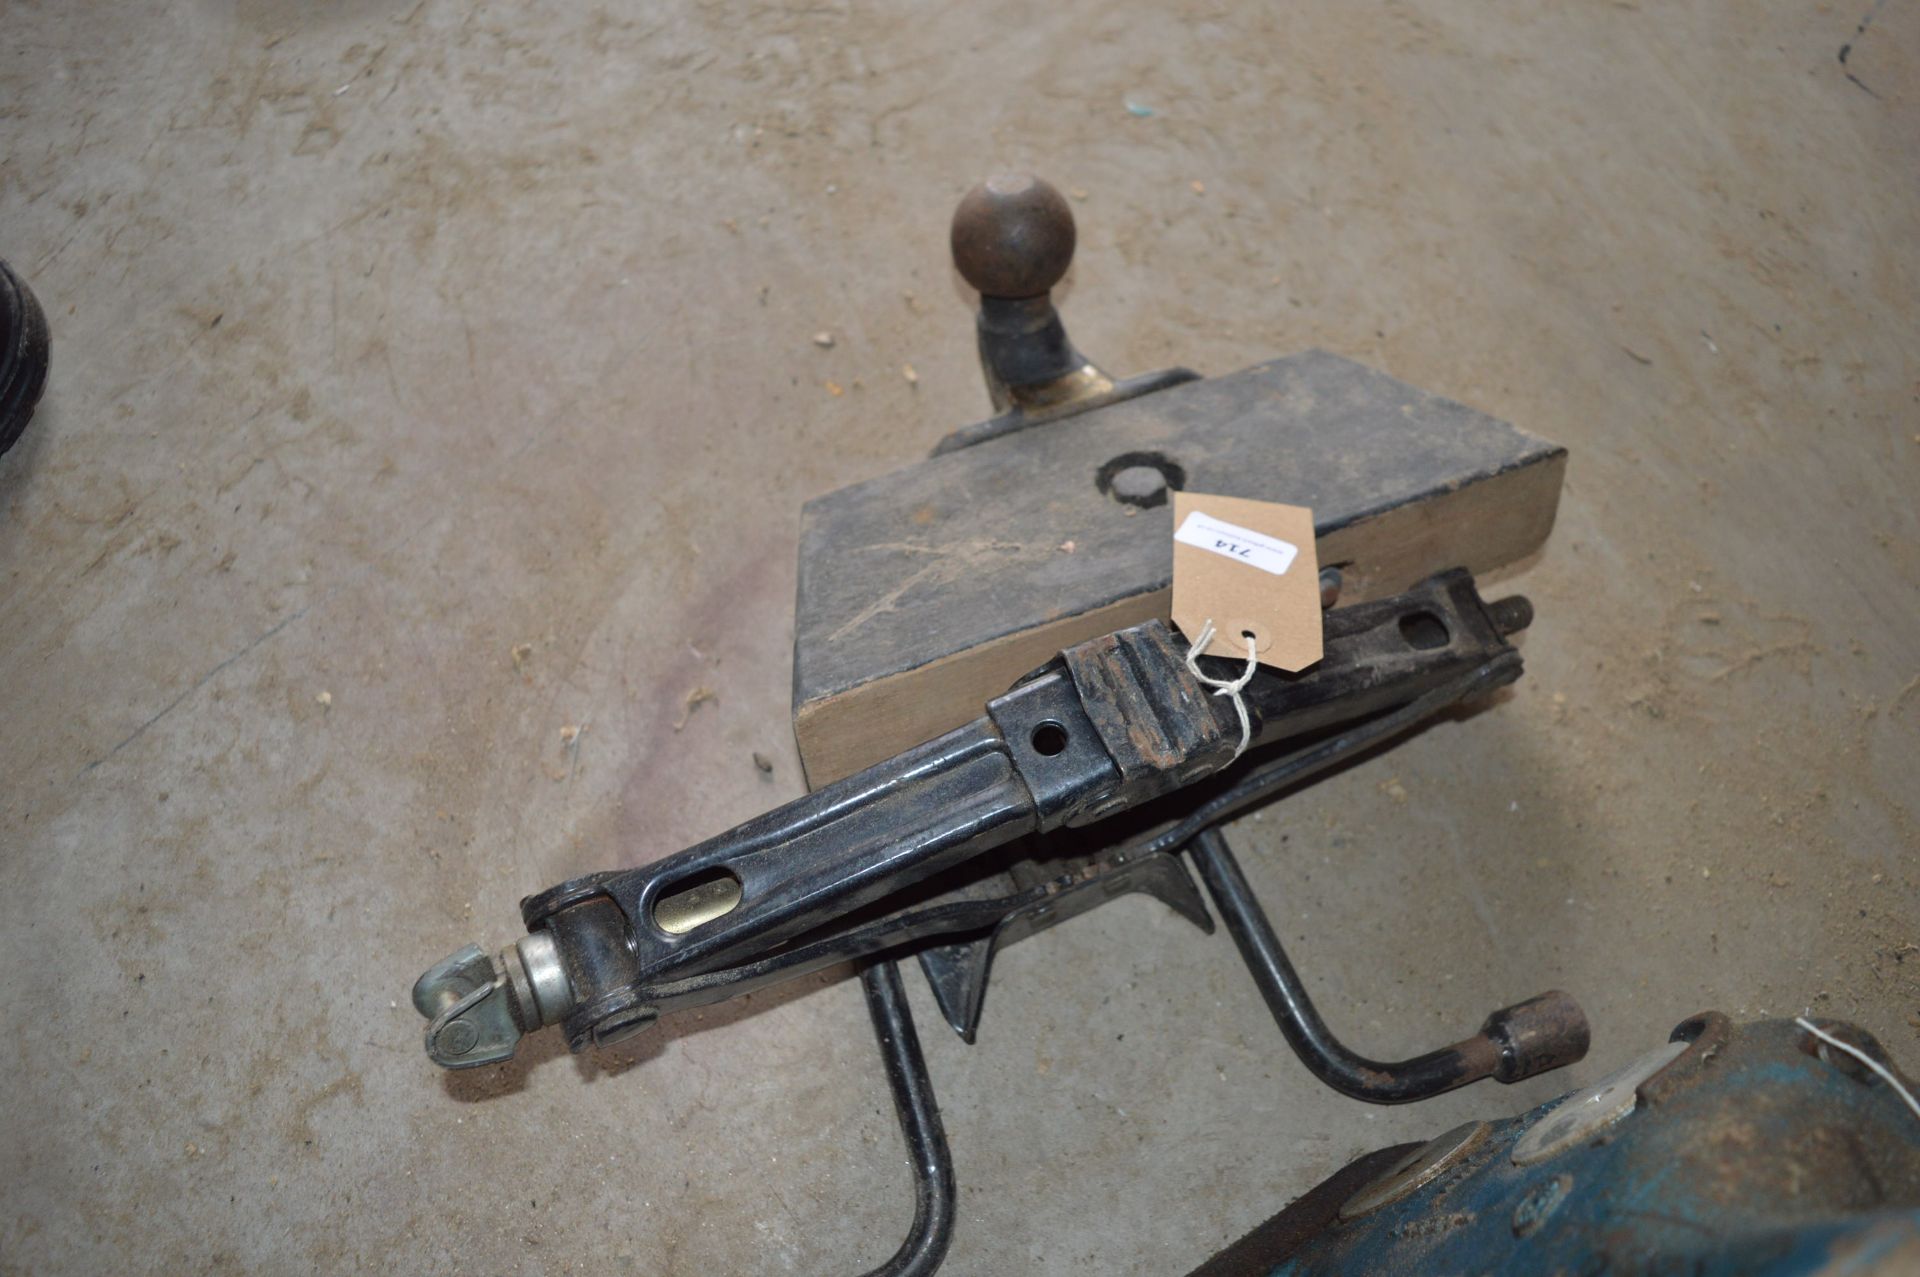 Scissor Jack with Brace Handle and Tow Ball